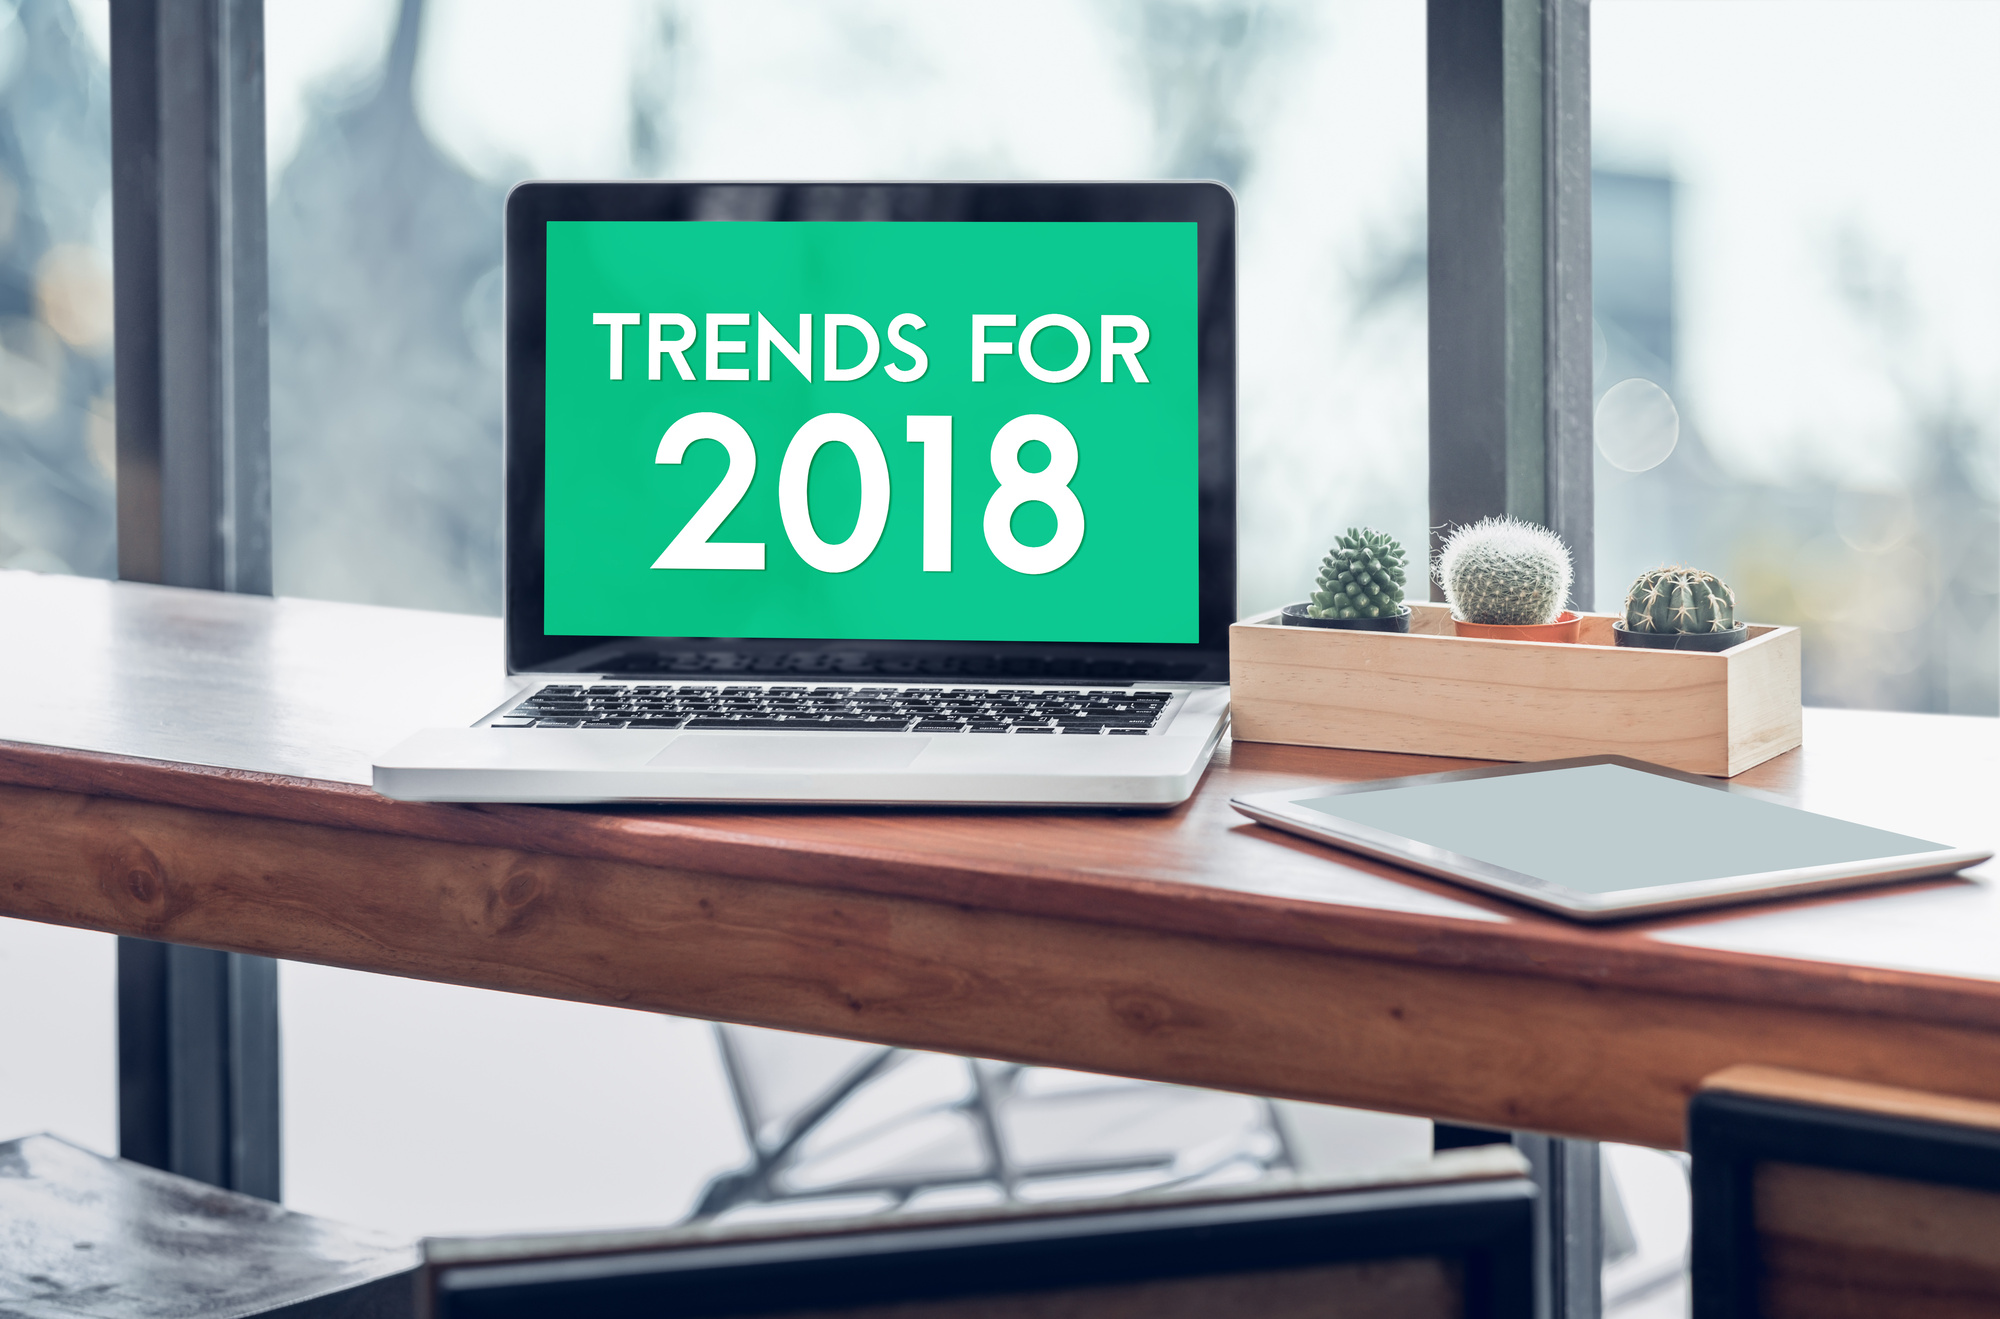 Trends for 2018 word in laptop computer screen with tablet on wood stood table in at window with blur background,Digital Business or marketing trending